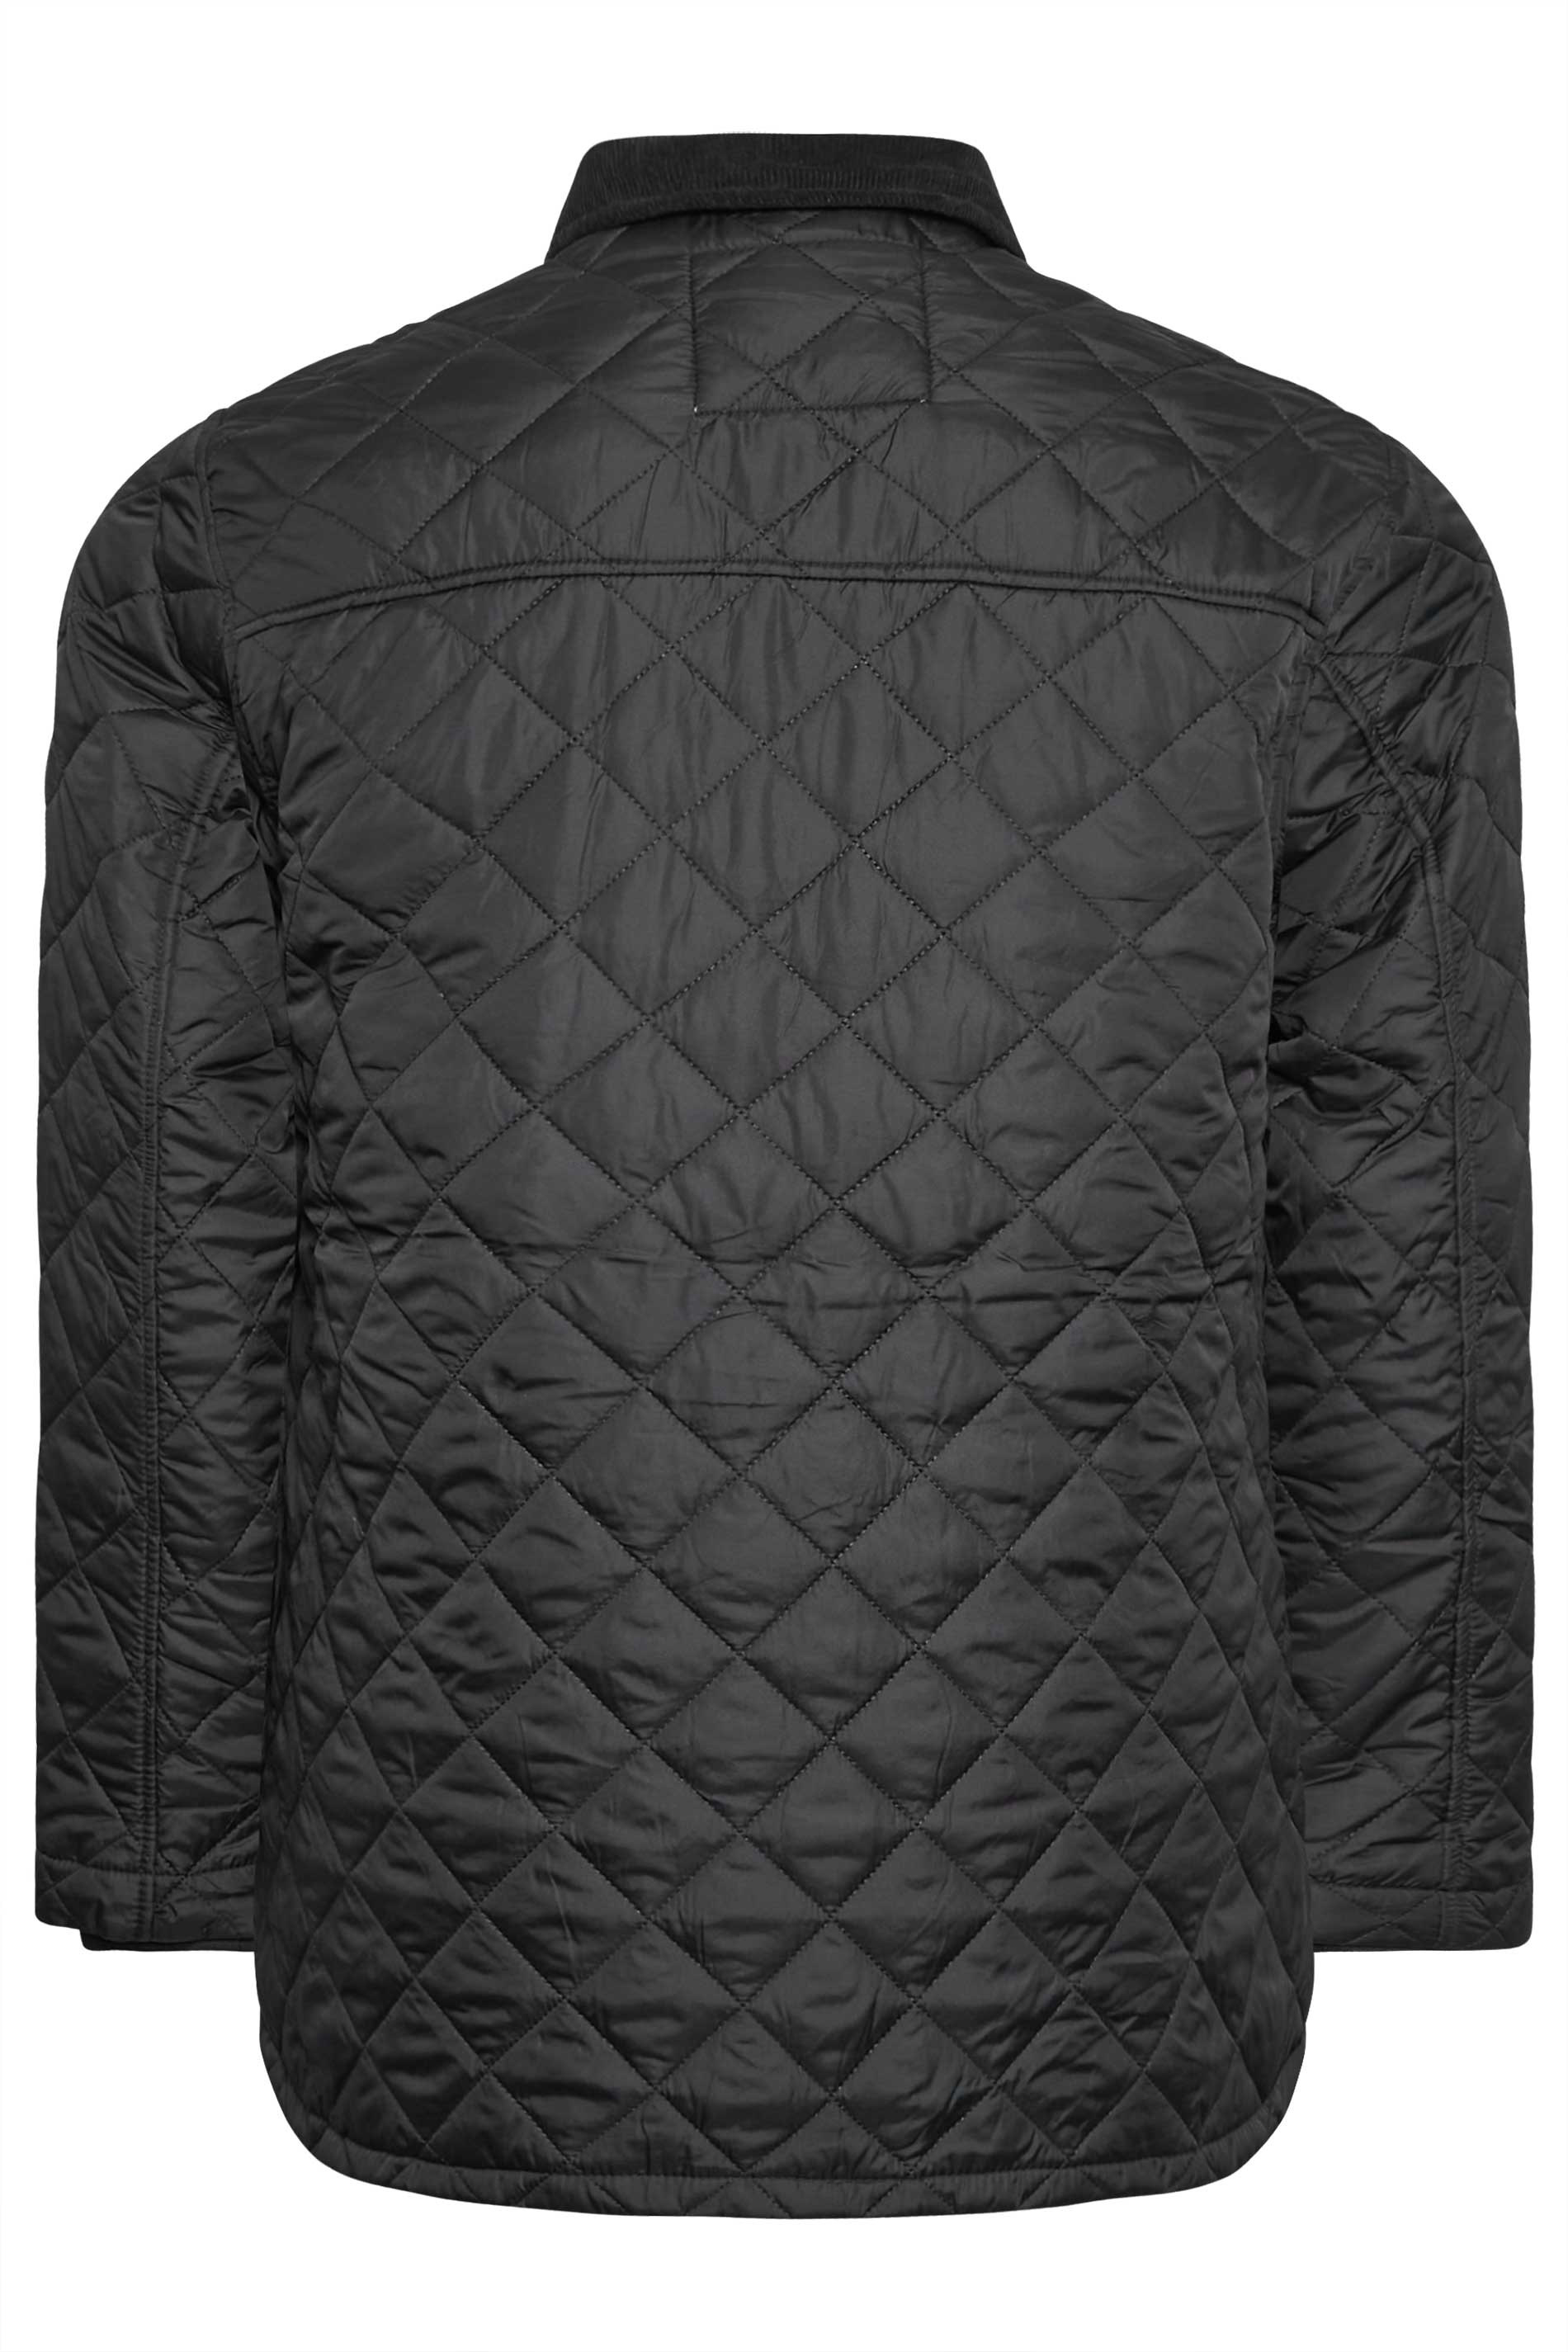 D555 Big & Tall Black Quilted Puffer Coat | BadRhino  3